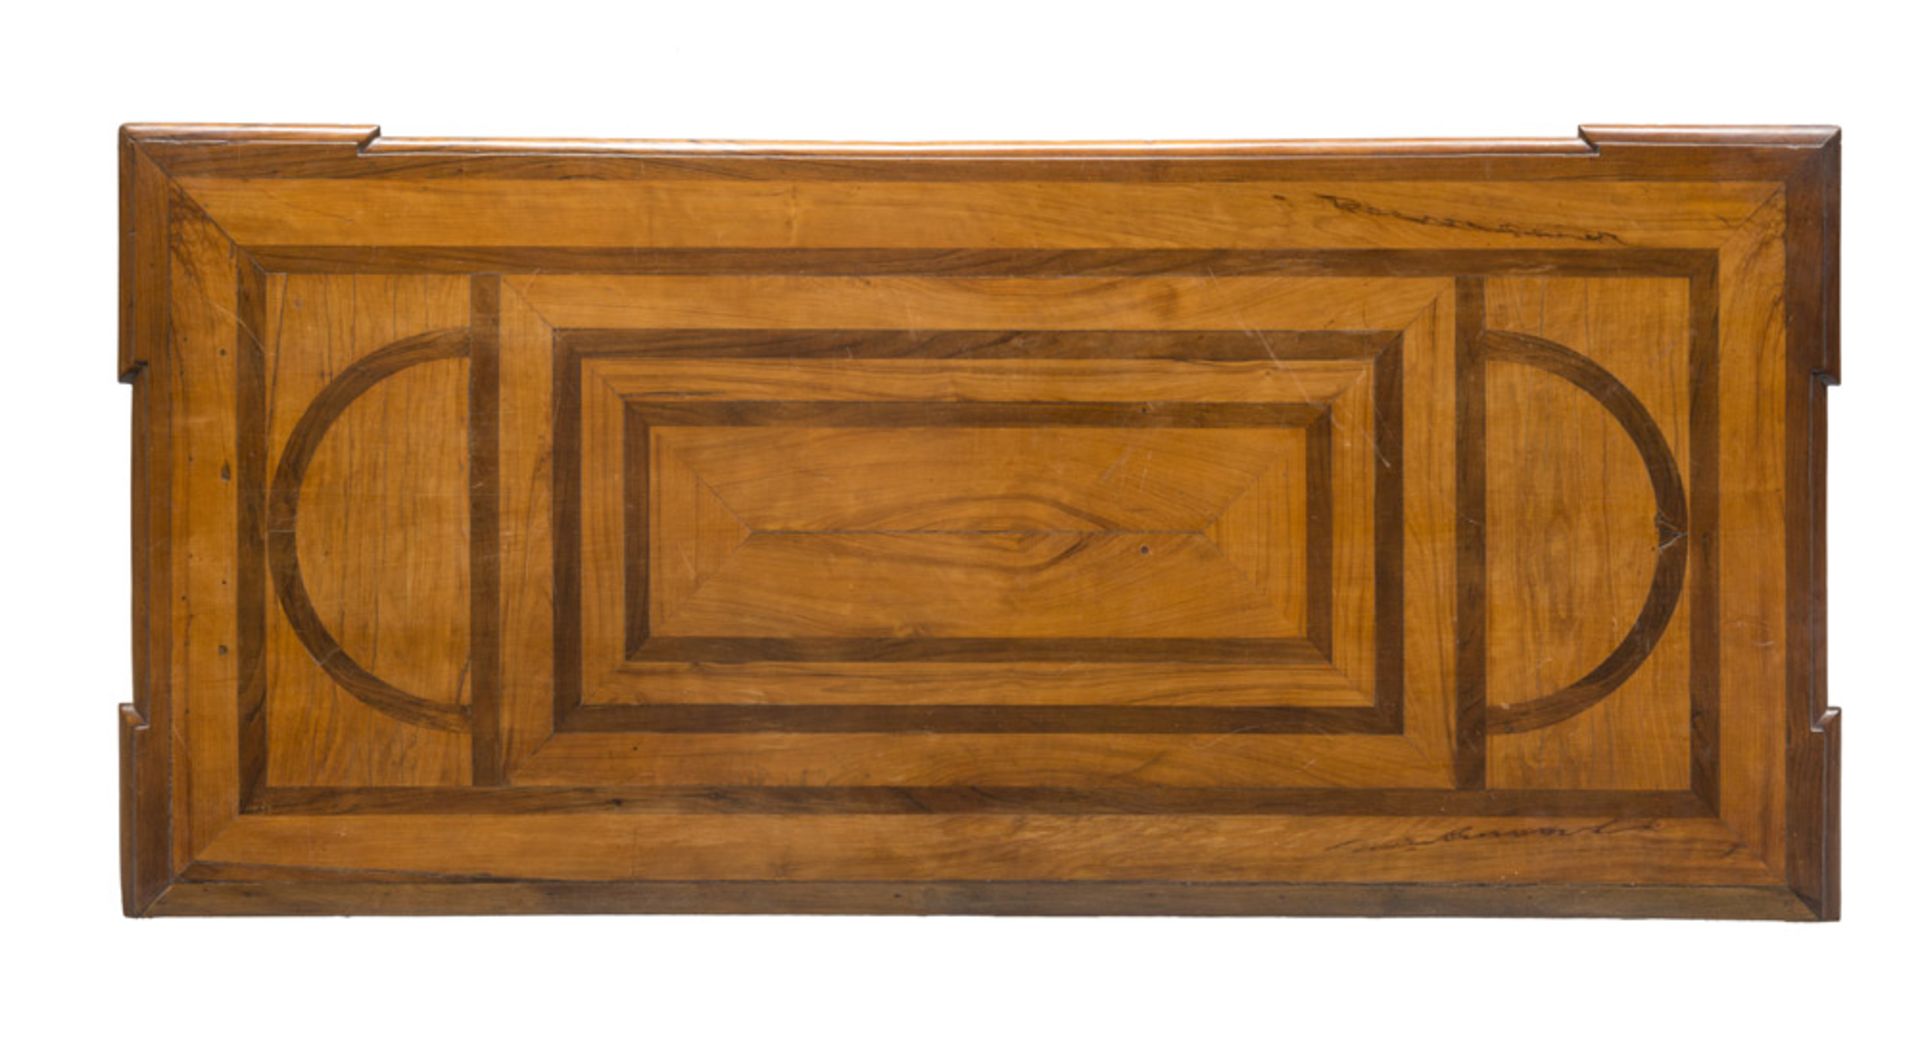 BEAUTIFUL TALLBOY IN CHERRY, TUSCAN 18TH CENTURY with reserves in violet wood. Top inlayed to - Image 2 of 2